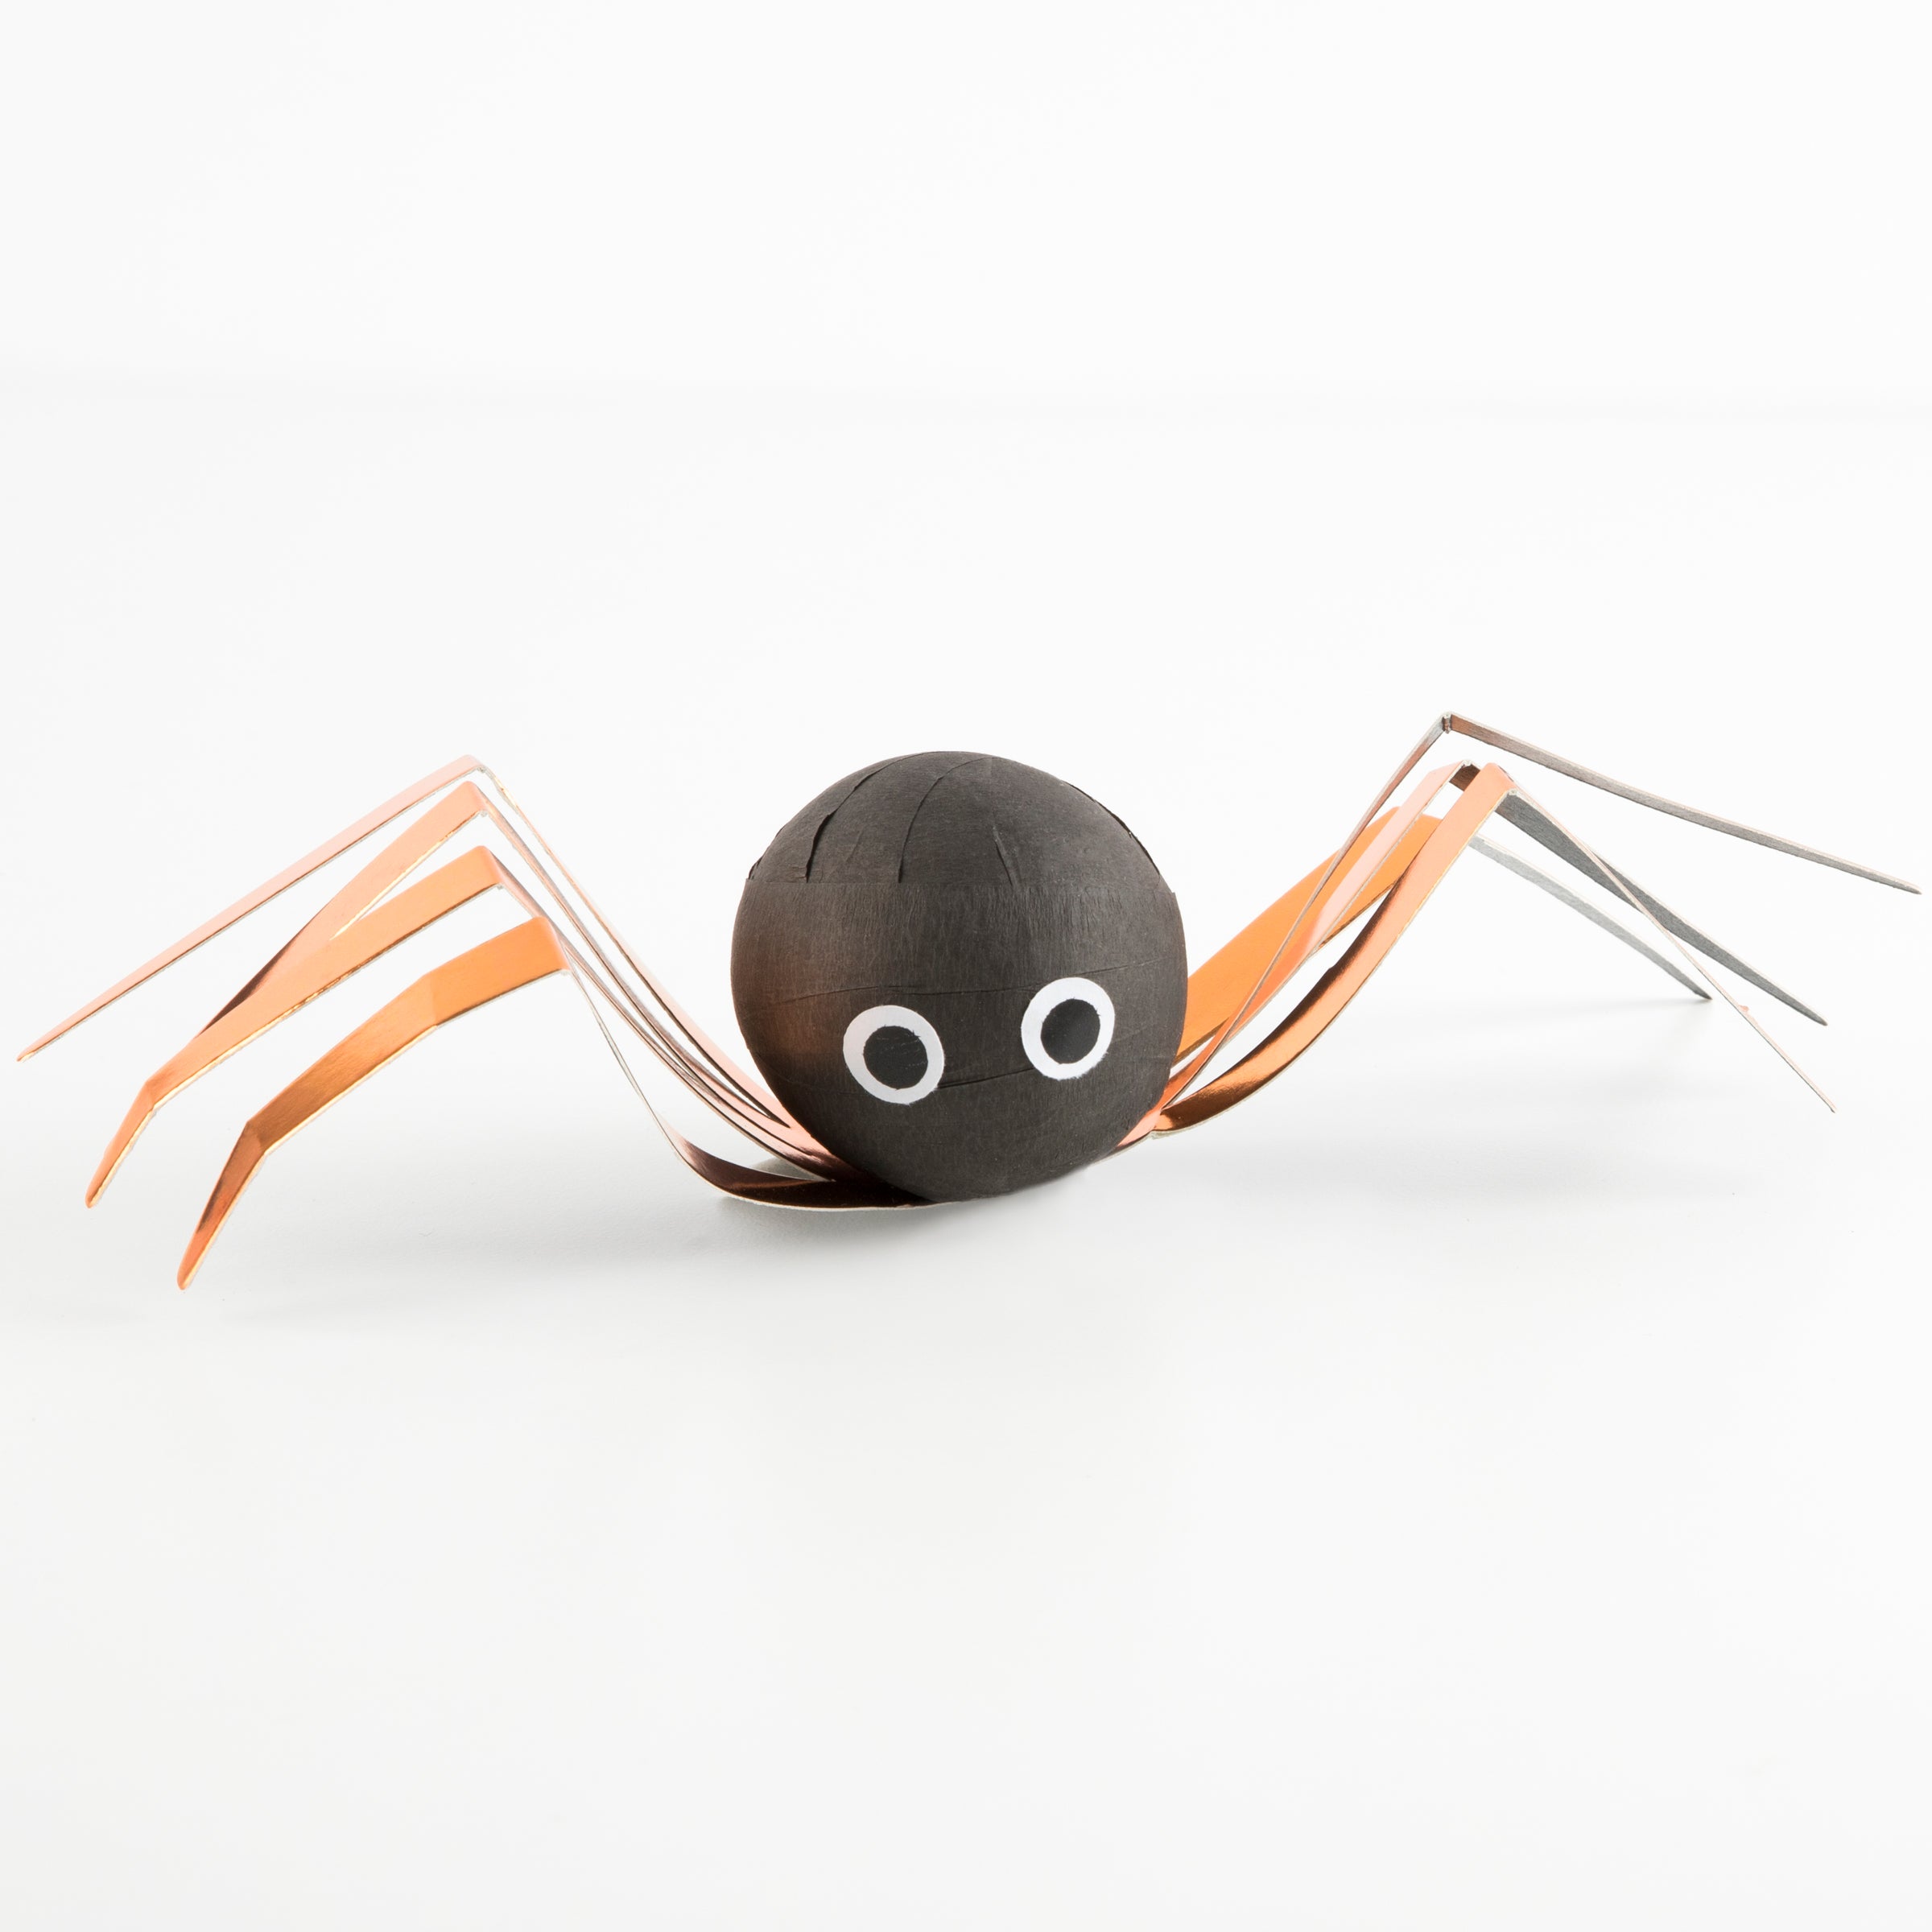 Surprise balls are a fantastic party bag gift for Halloween and make great Halloween party decorations too.